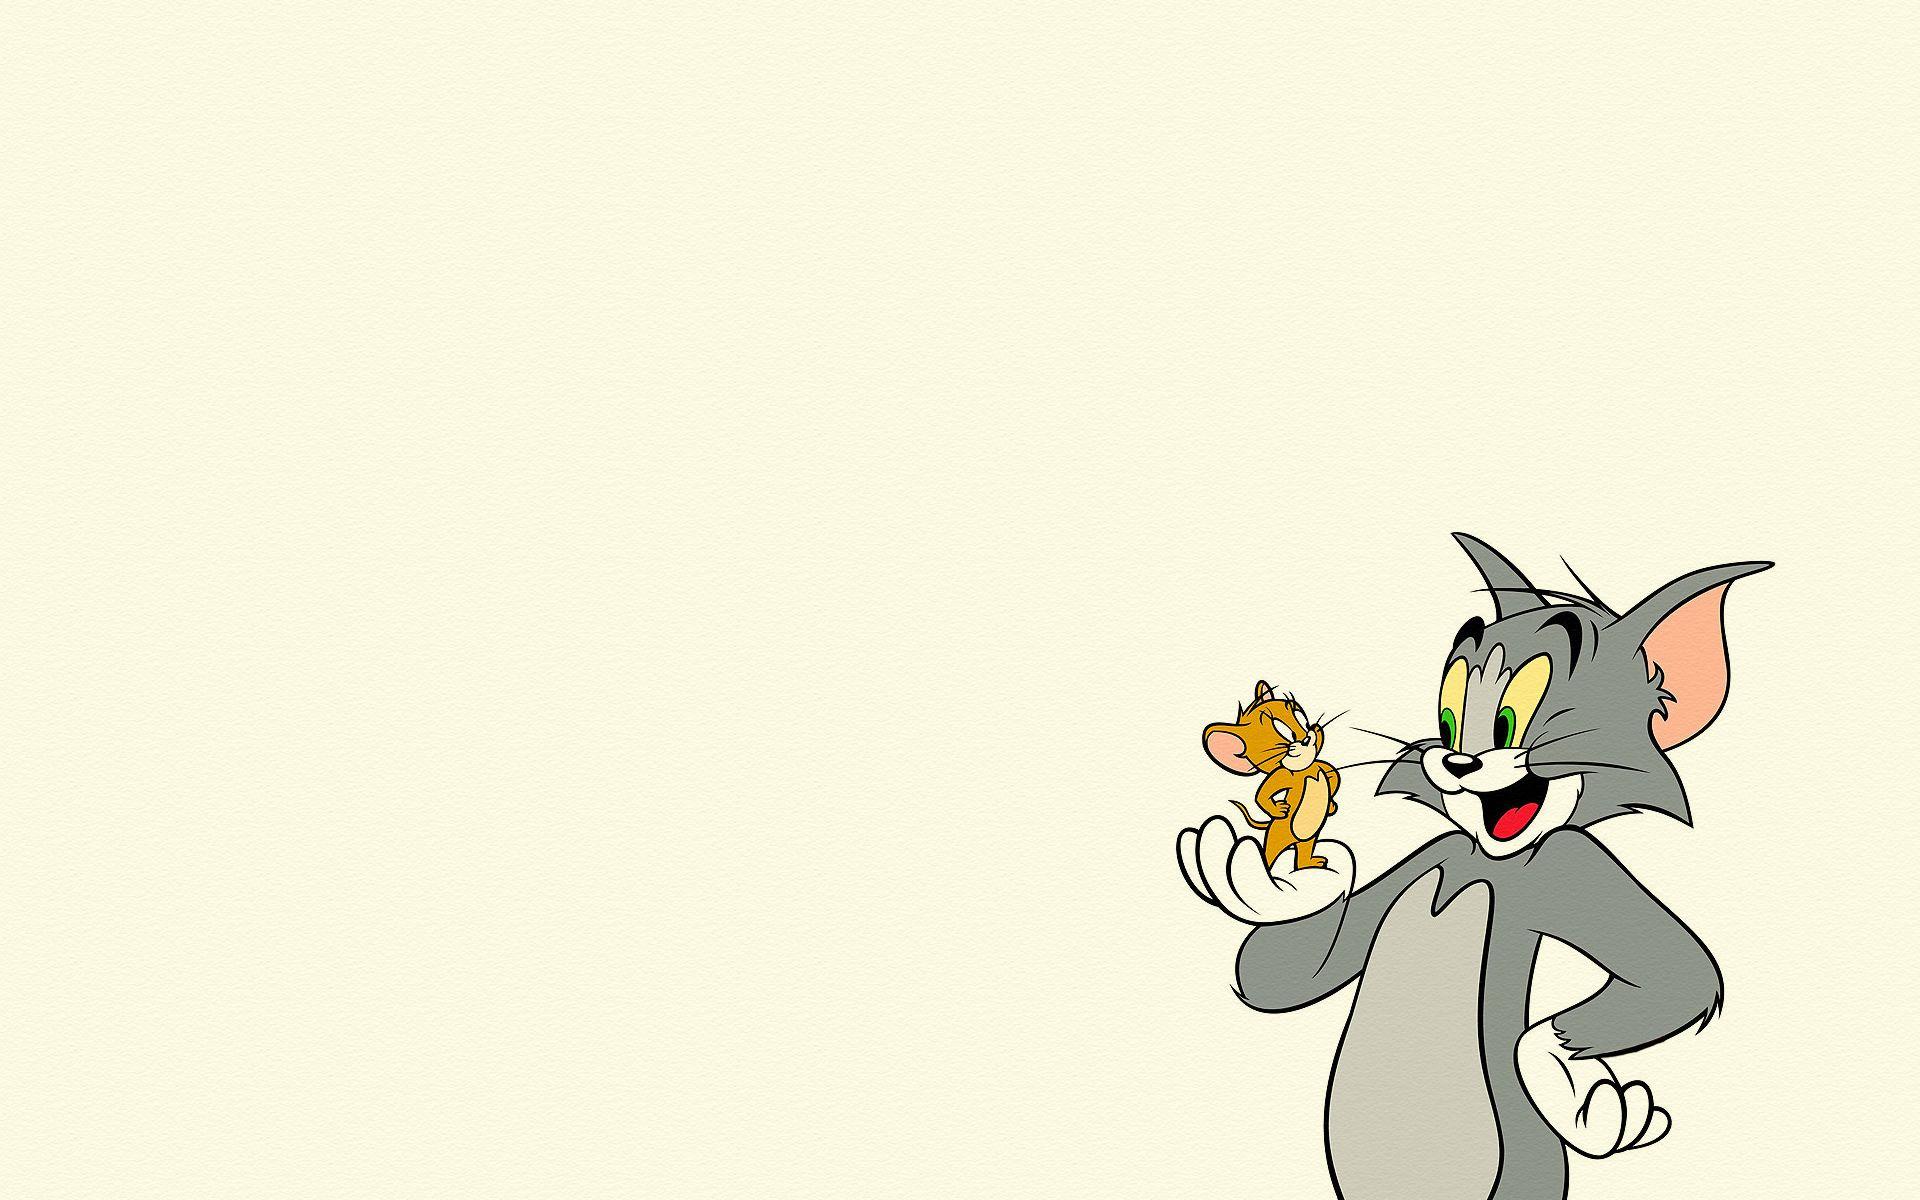 Tom and Jerry Aesthetic Laptop Wallpapers - Top Free Tom and Jerry ...